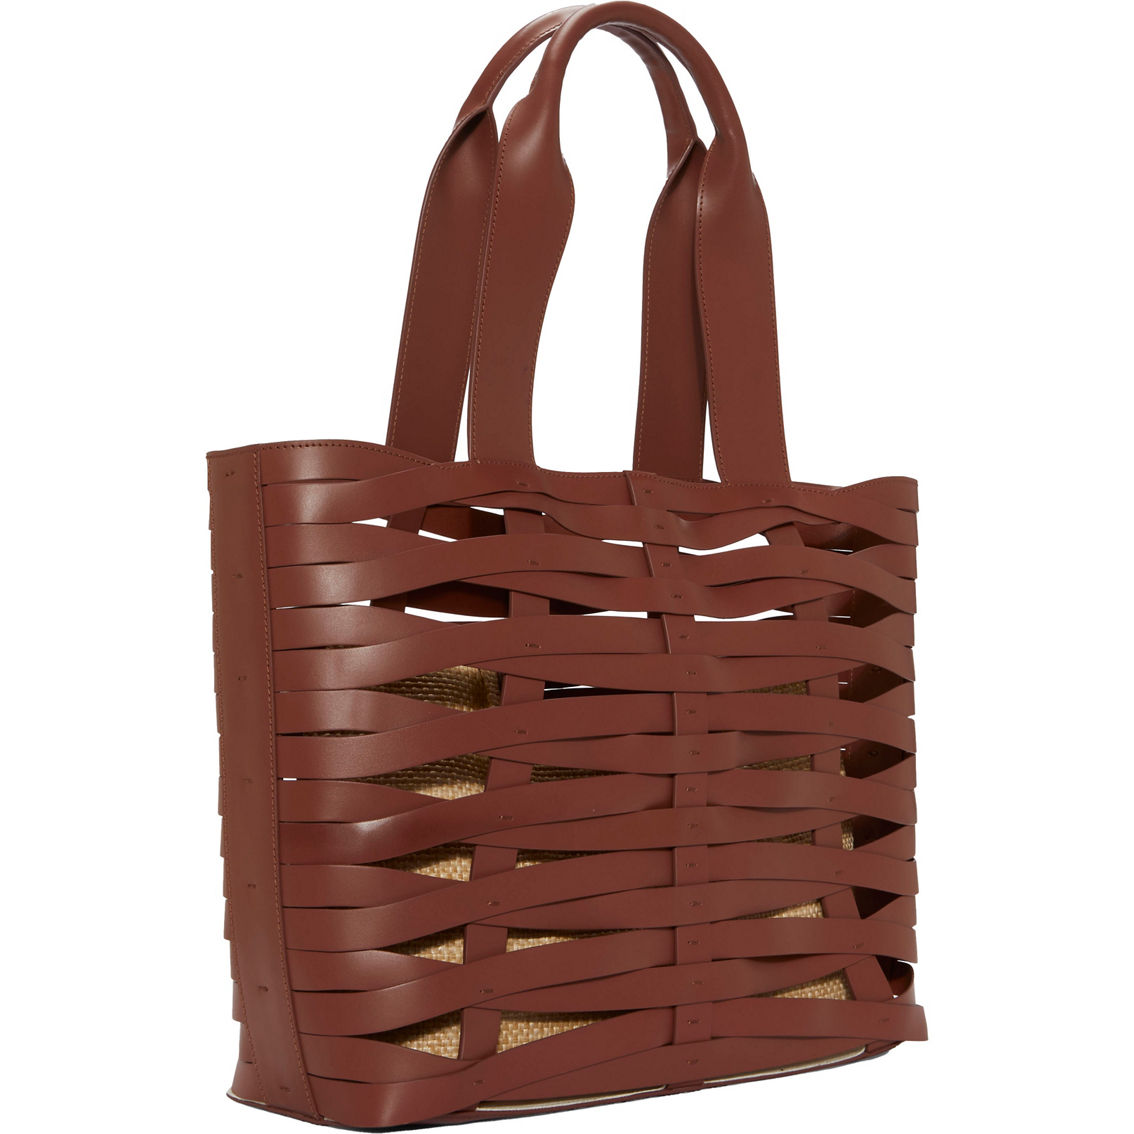 Vince Camuto Cecil Tote, Saddle - Image 3 of 6